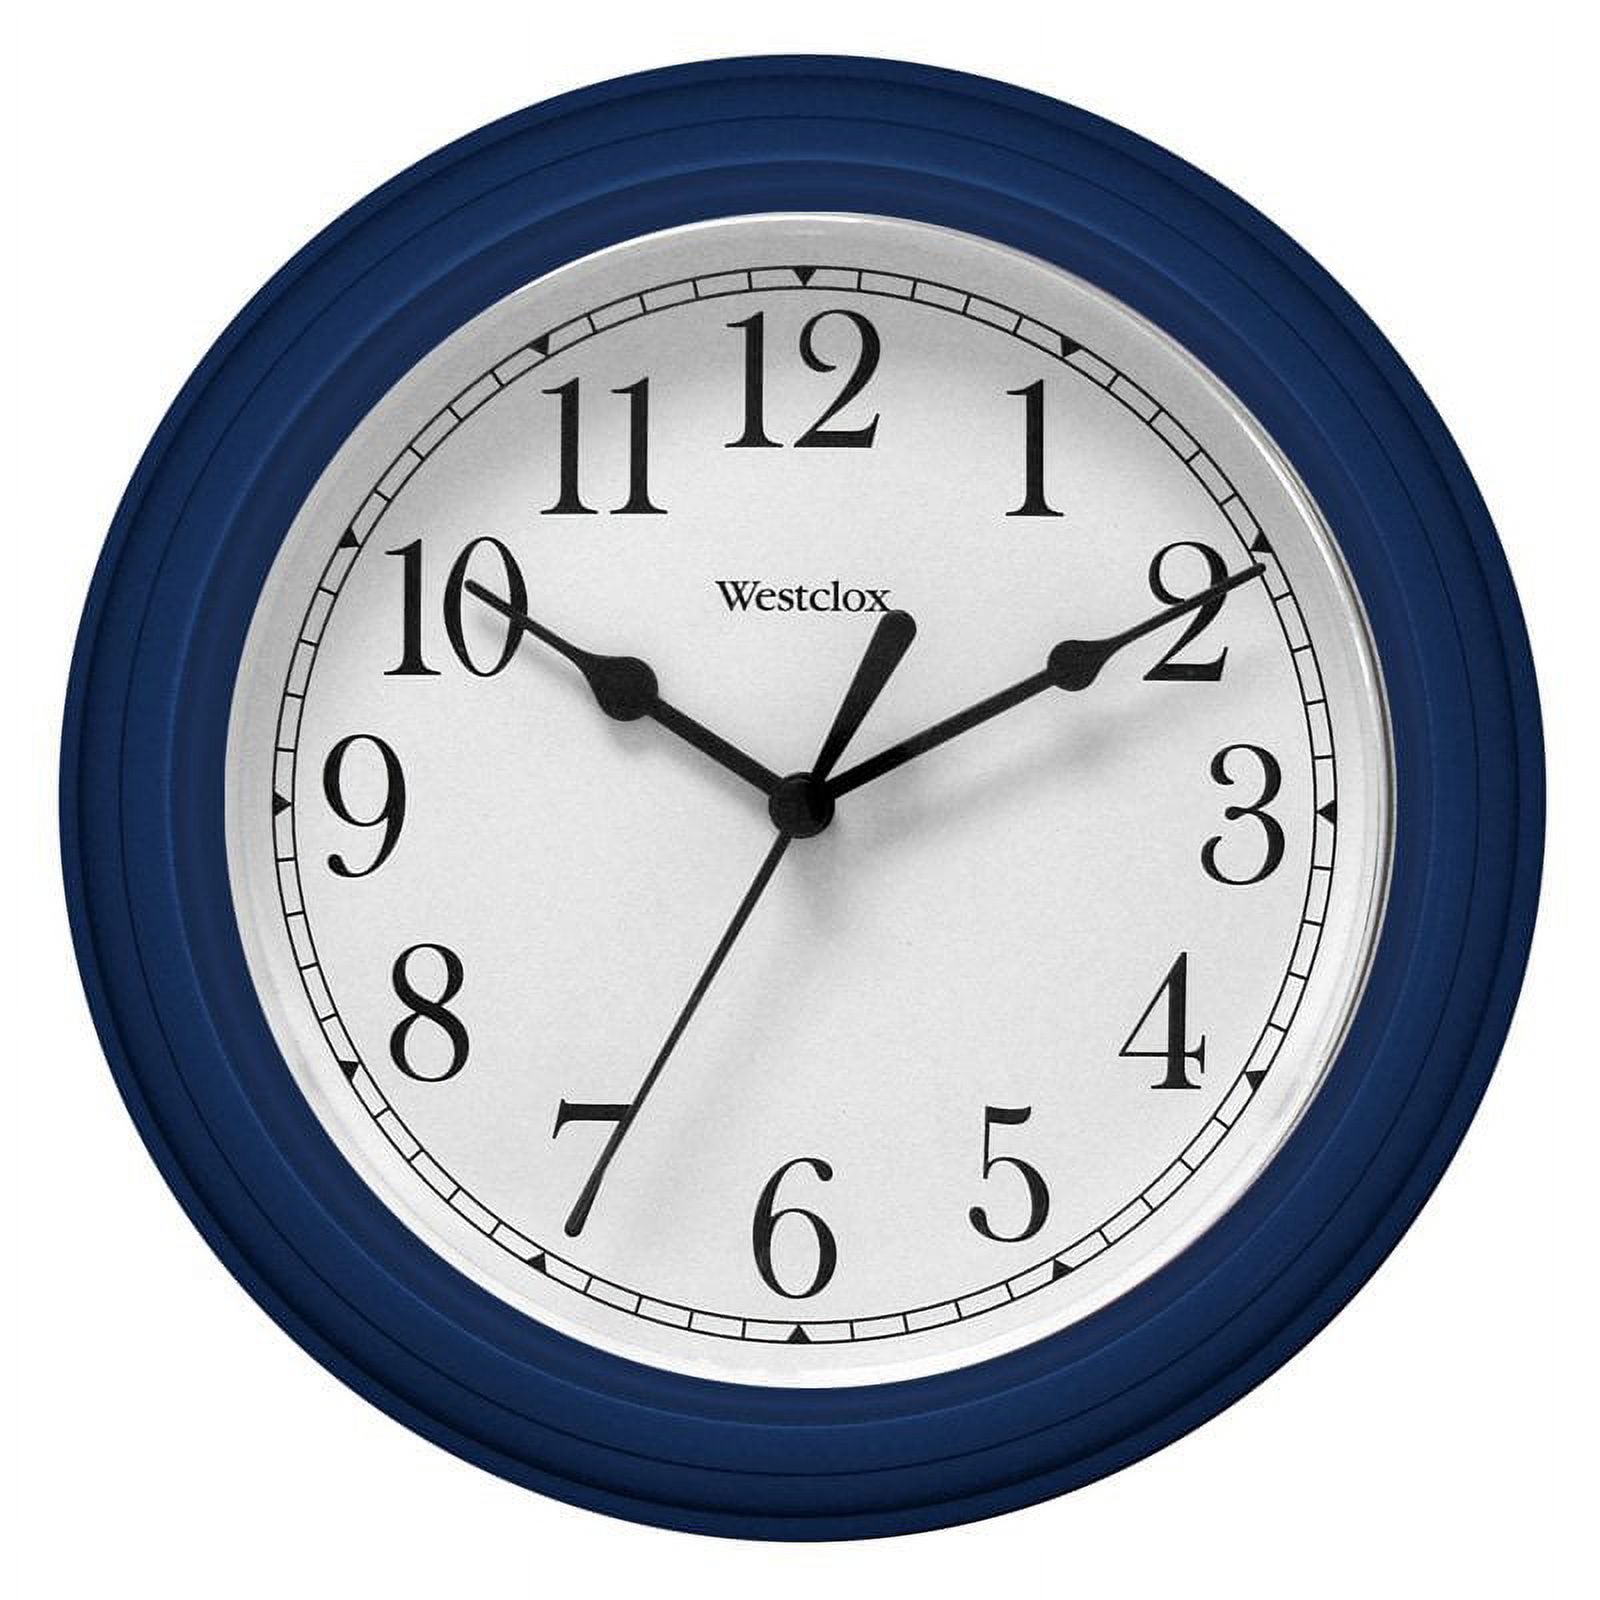 Westclox 46985 Simplicity 9 Inch Round Wall Clock- Blue - image 1 of 3